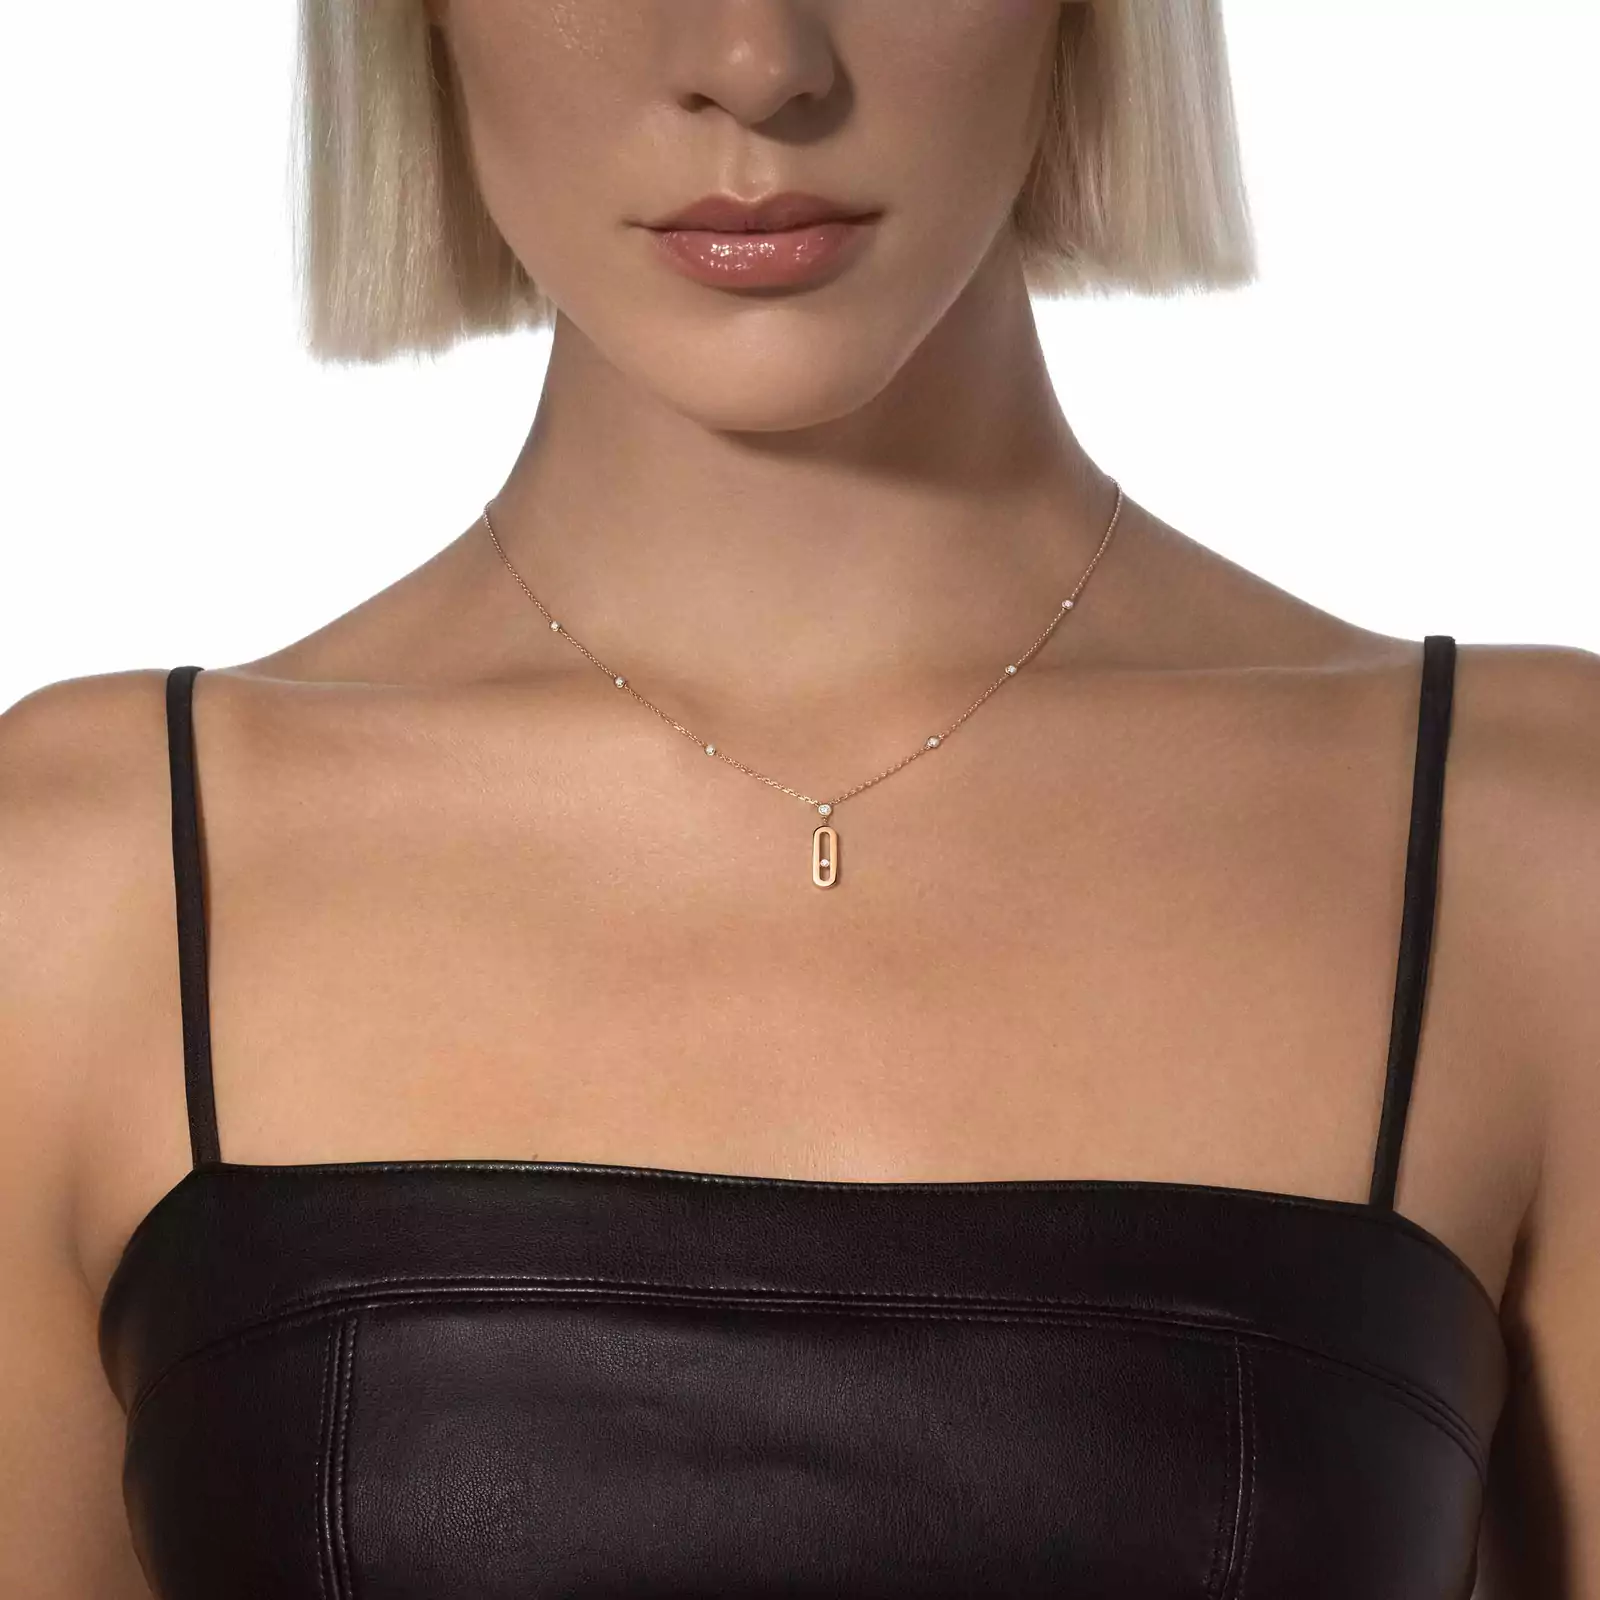 Move Uno Long Necklace  Pink Gold For Her Diamond Necklace 10111-PG